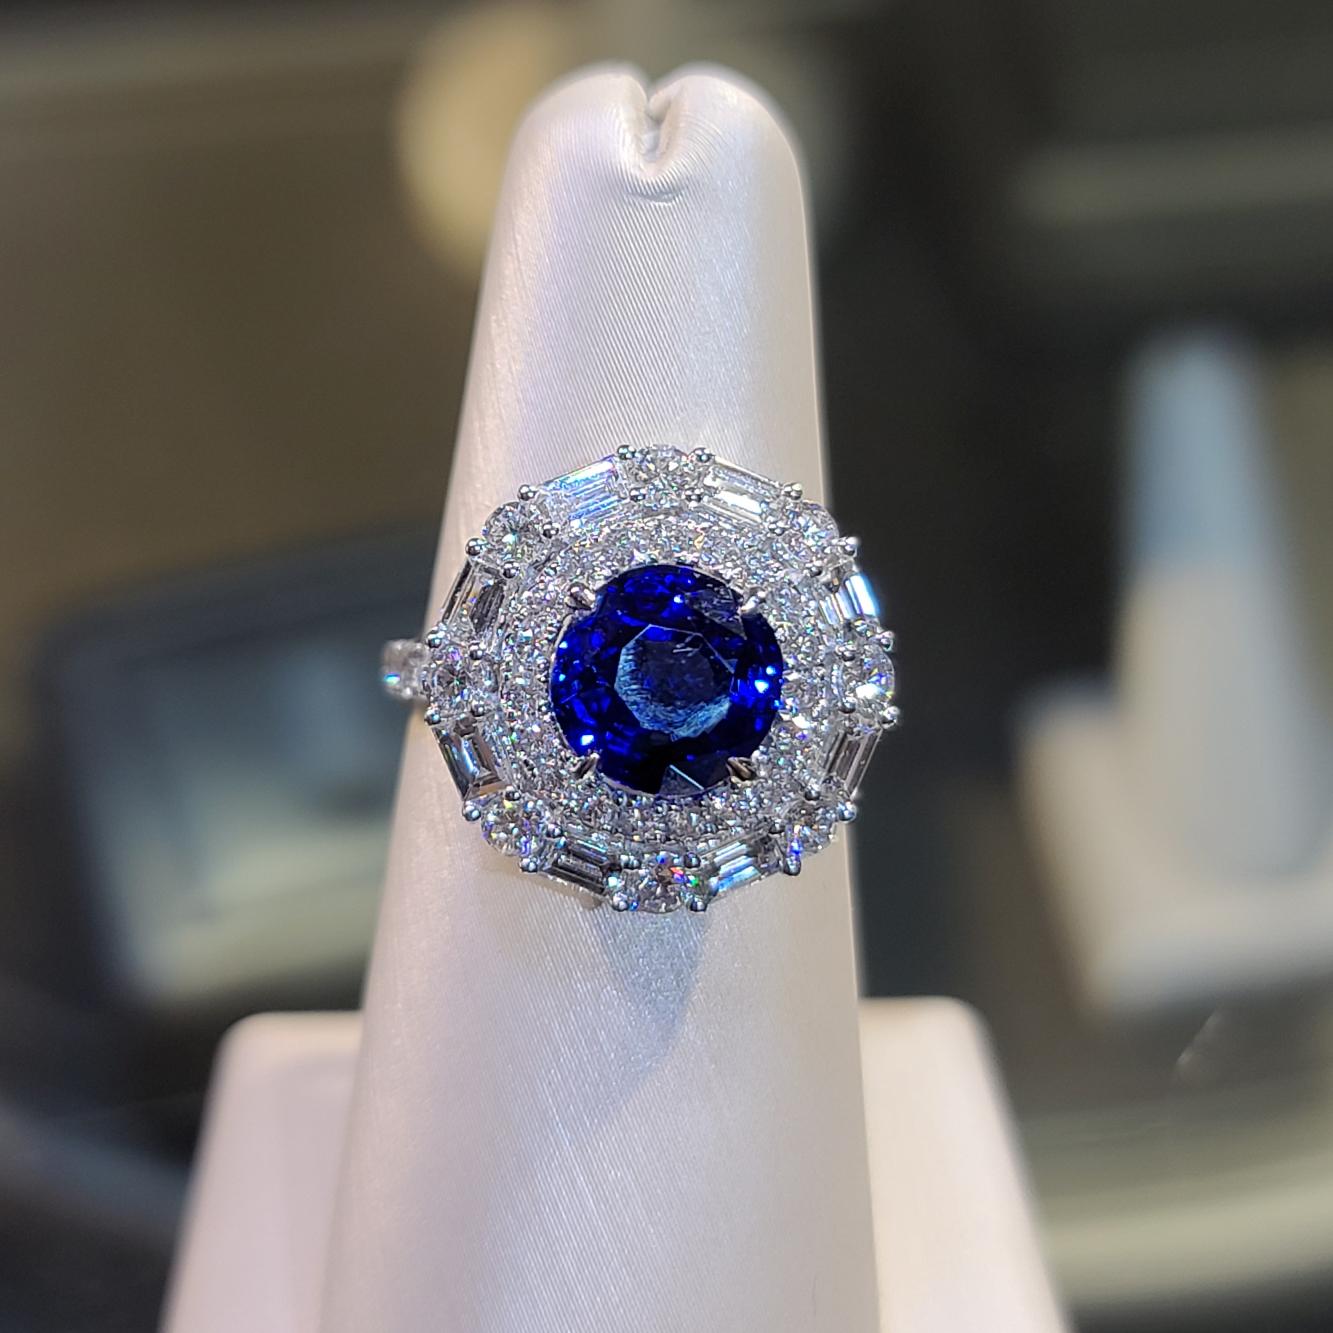 1 SAPP - 4.17 ct    AIGS GF19031056   Blue / Heated / Sri Lanka
Carat Weight: 4.17ct  / Shape and cut: Oval / Faceted
Colour: Blue / Treatment: Heated 
Origin: Sri Lanka
Cert: AIGS GF19031056
White Diamond Weight: 1.29 ct / Dia 41  pcs
Baguette